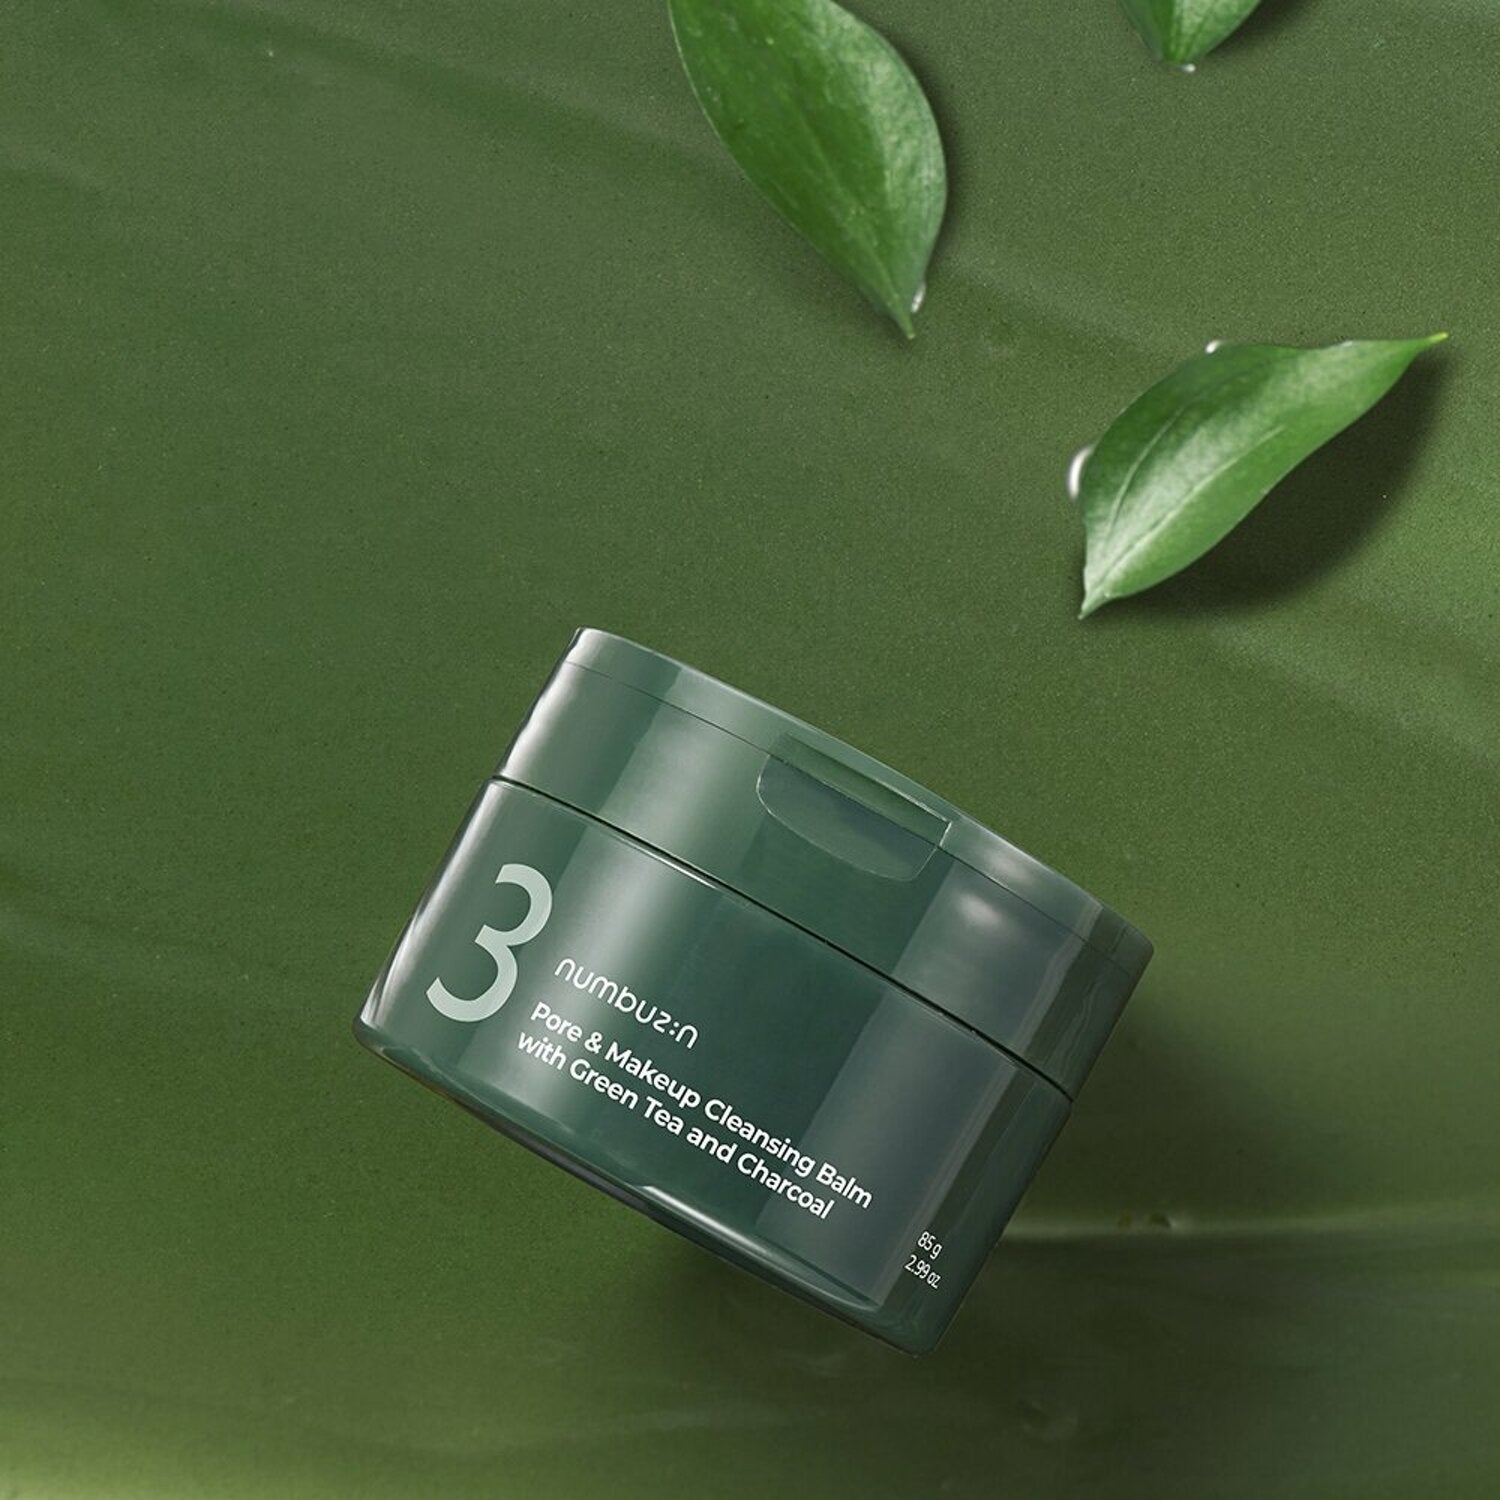 [NEW] numbuzin No. 3 Pore & Makeup Cleansing Balm with Green Tea and Charcoal 85g - Kpop Wholesale | Seoufly